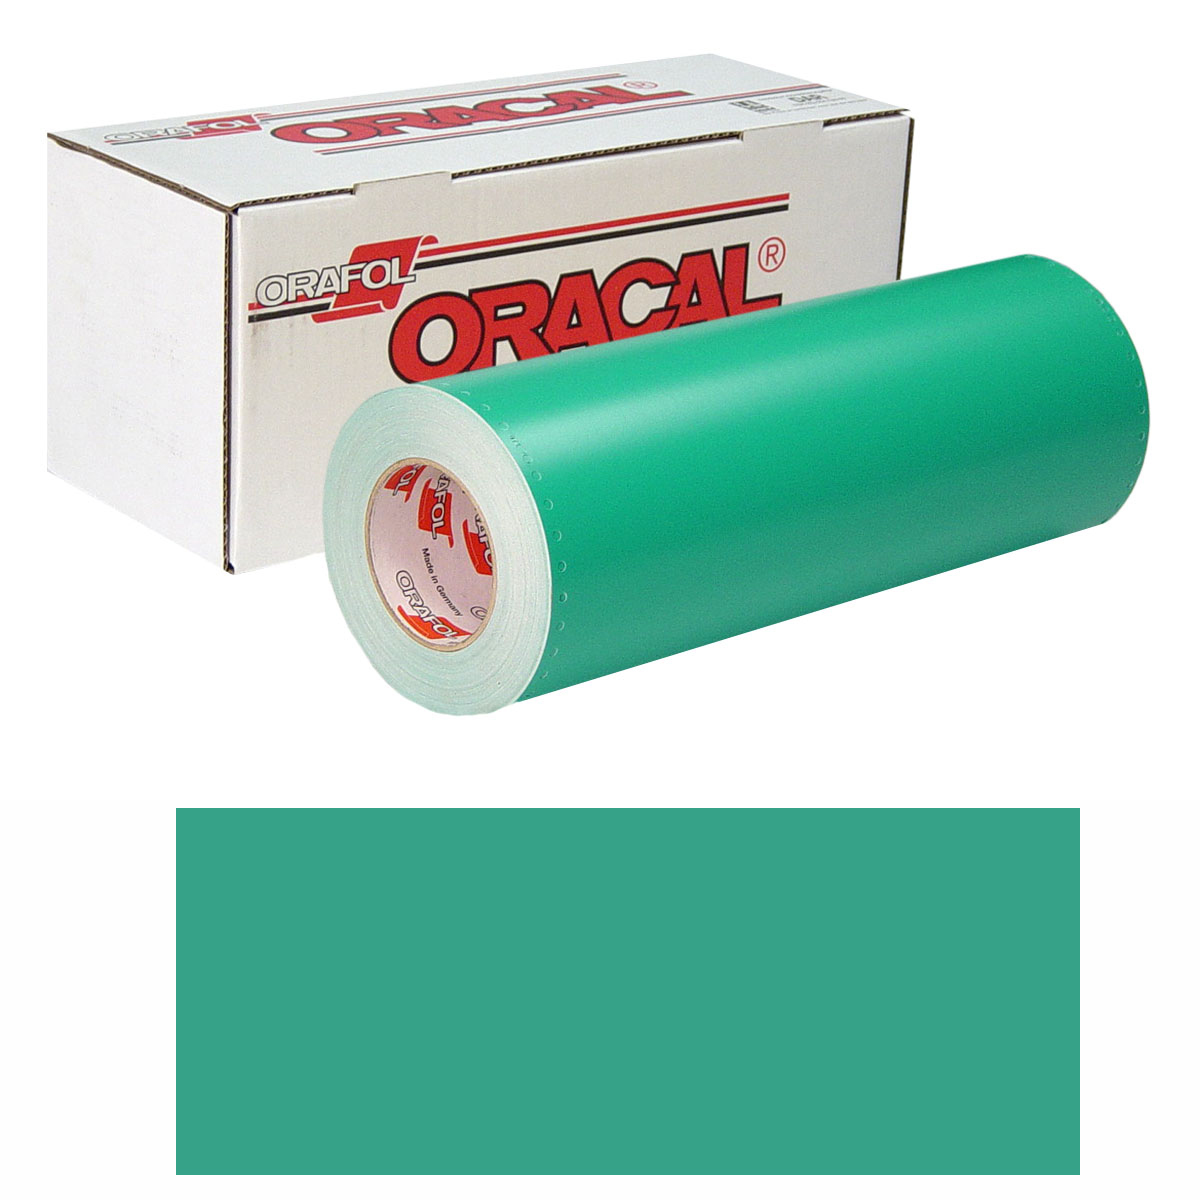 ORACAL 8500 15in X 10yd 009 Middle Green